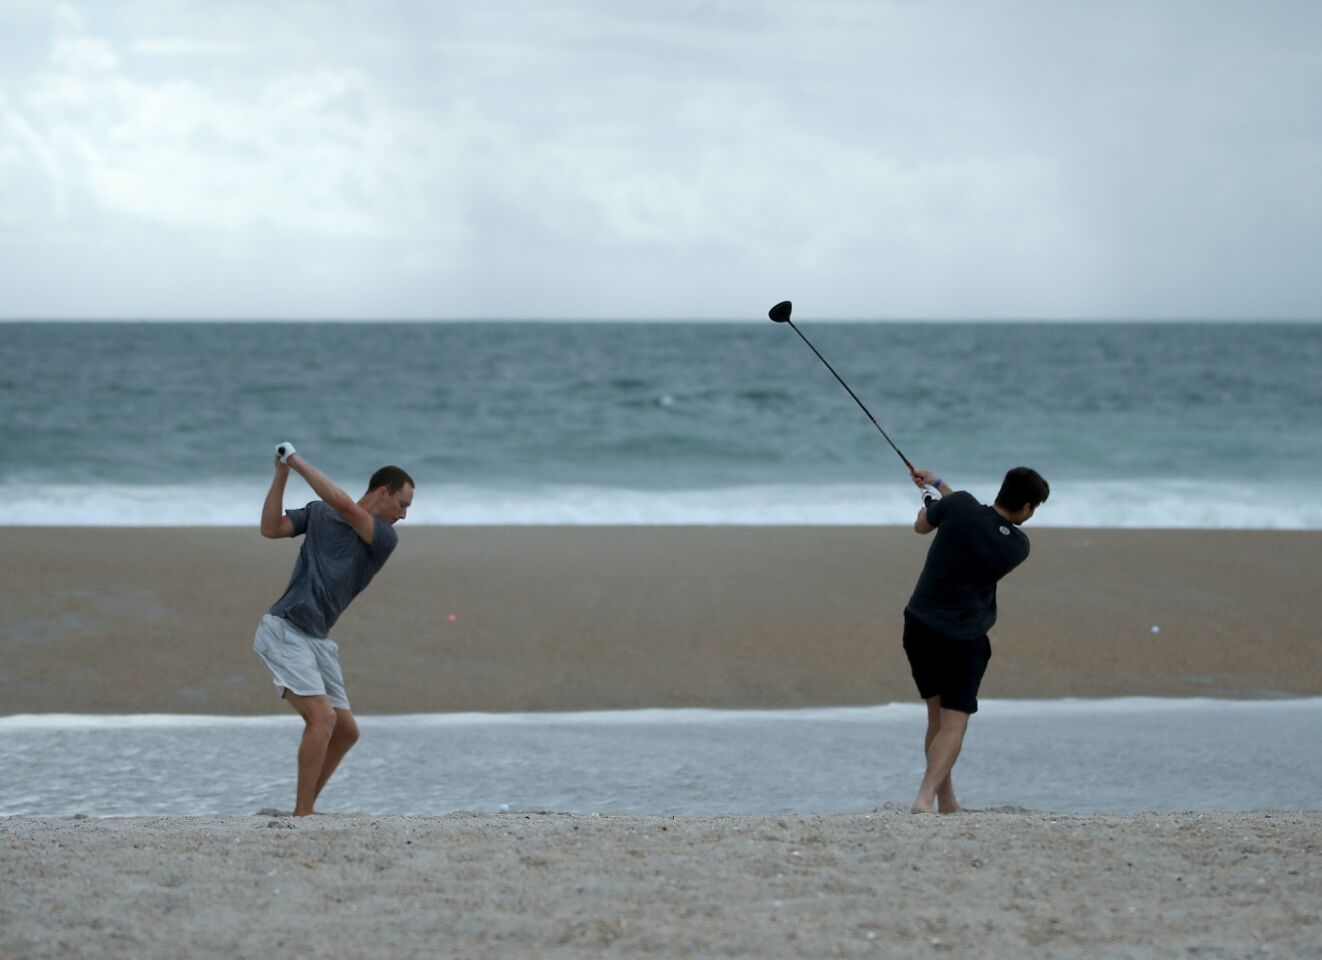 Jacob Whitehead, left, and Matt Jones hit golf balls into the surf as Hurricane Florence approaches in Wrightsville Beach, N.C.